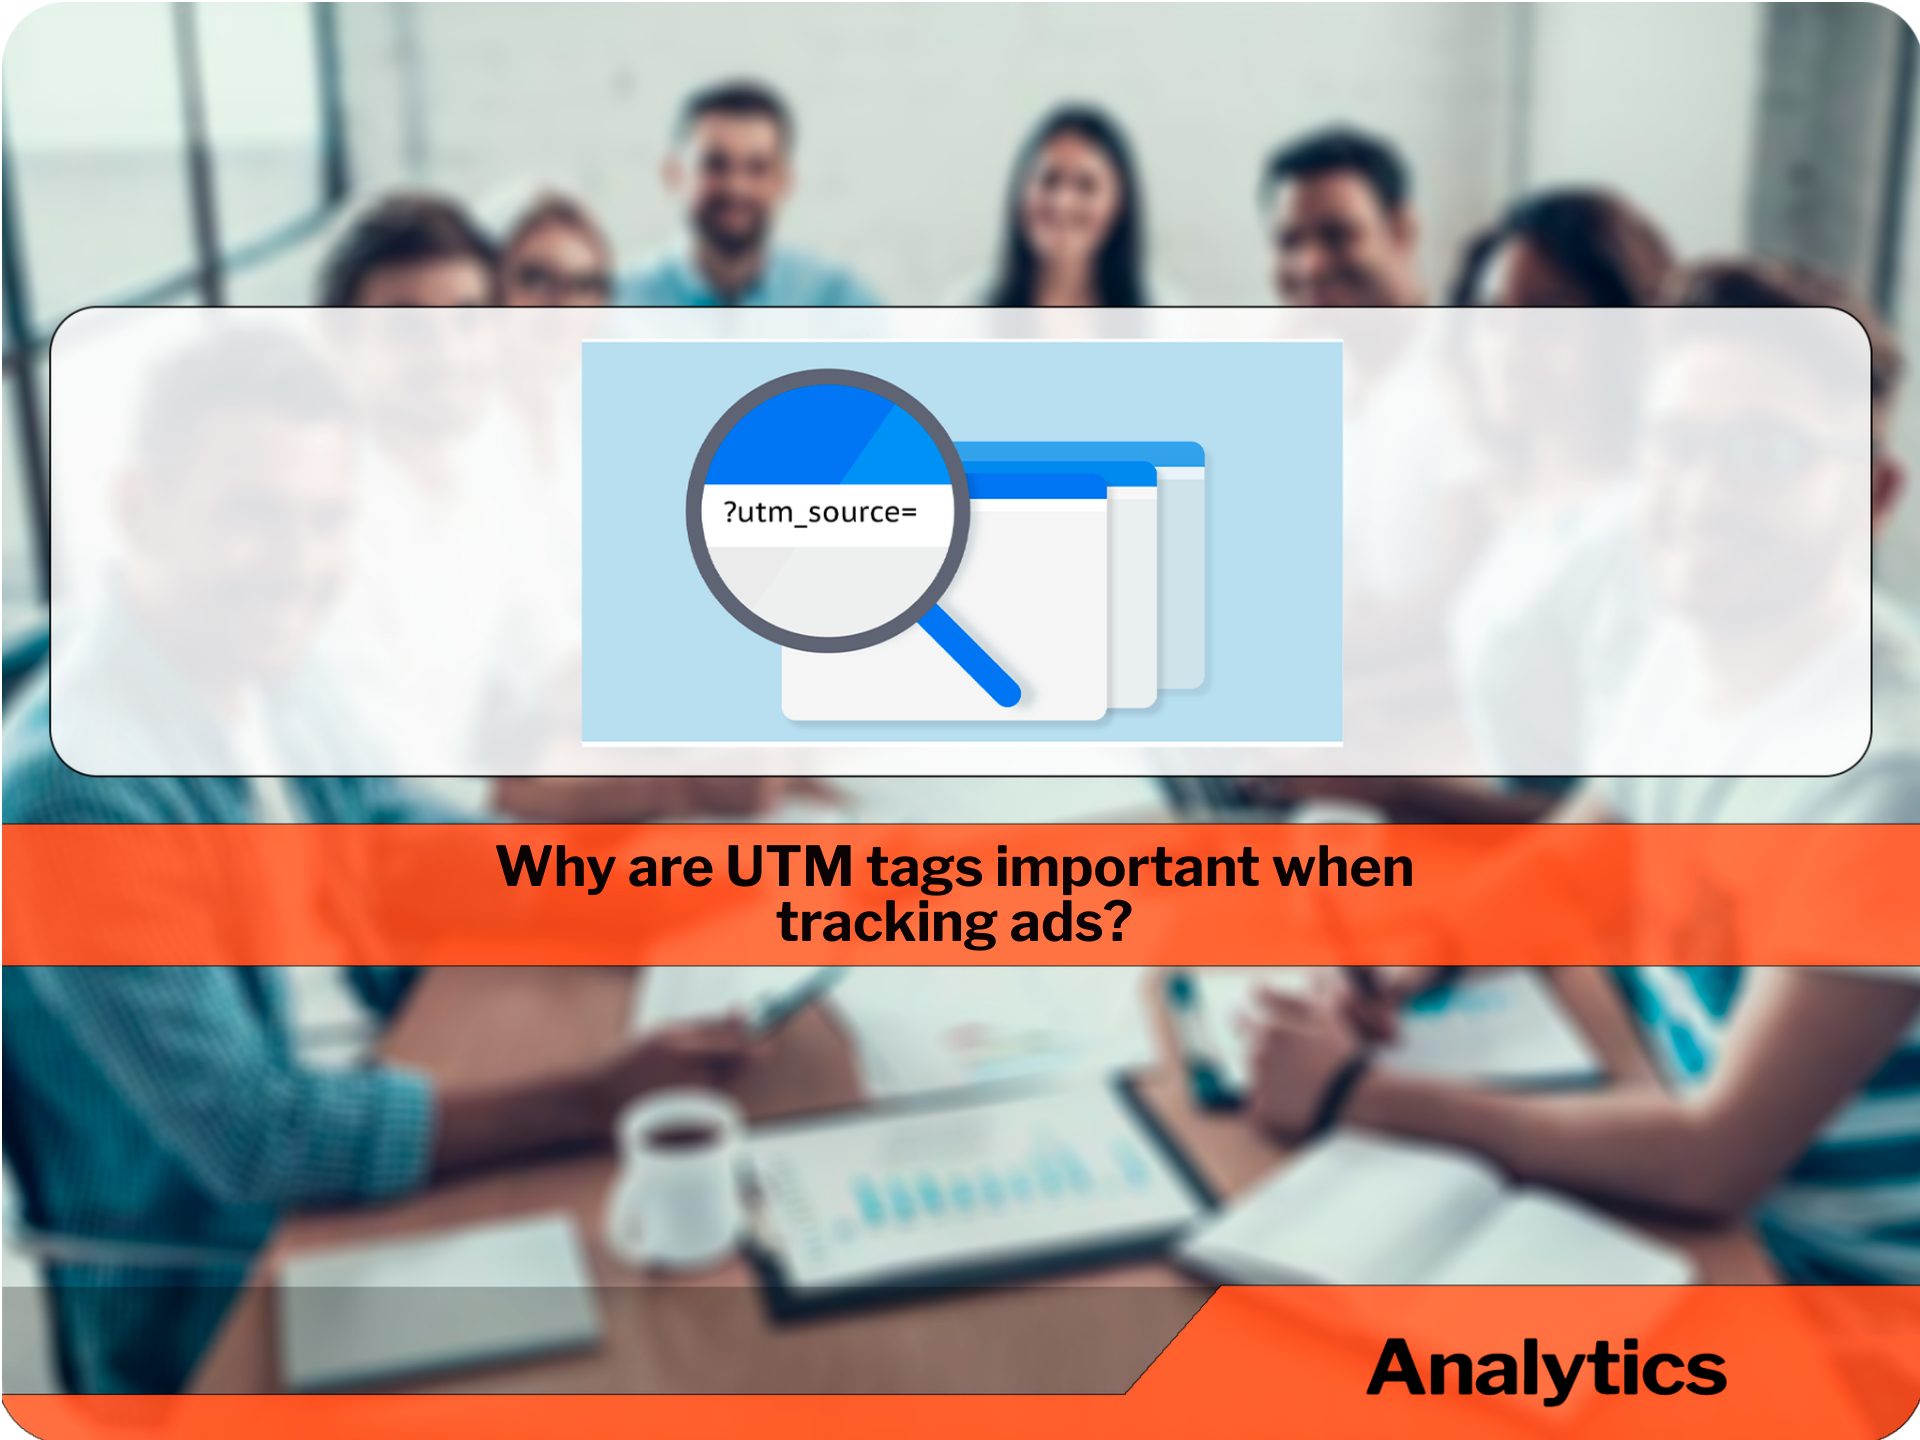 Why are UTM tags important when tracking ads?